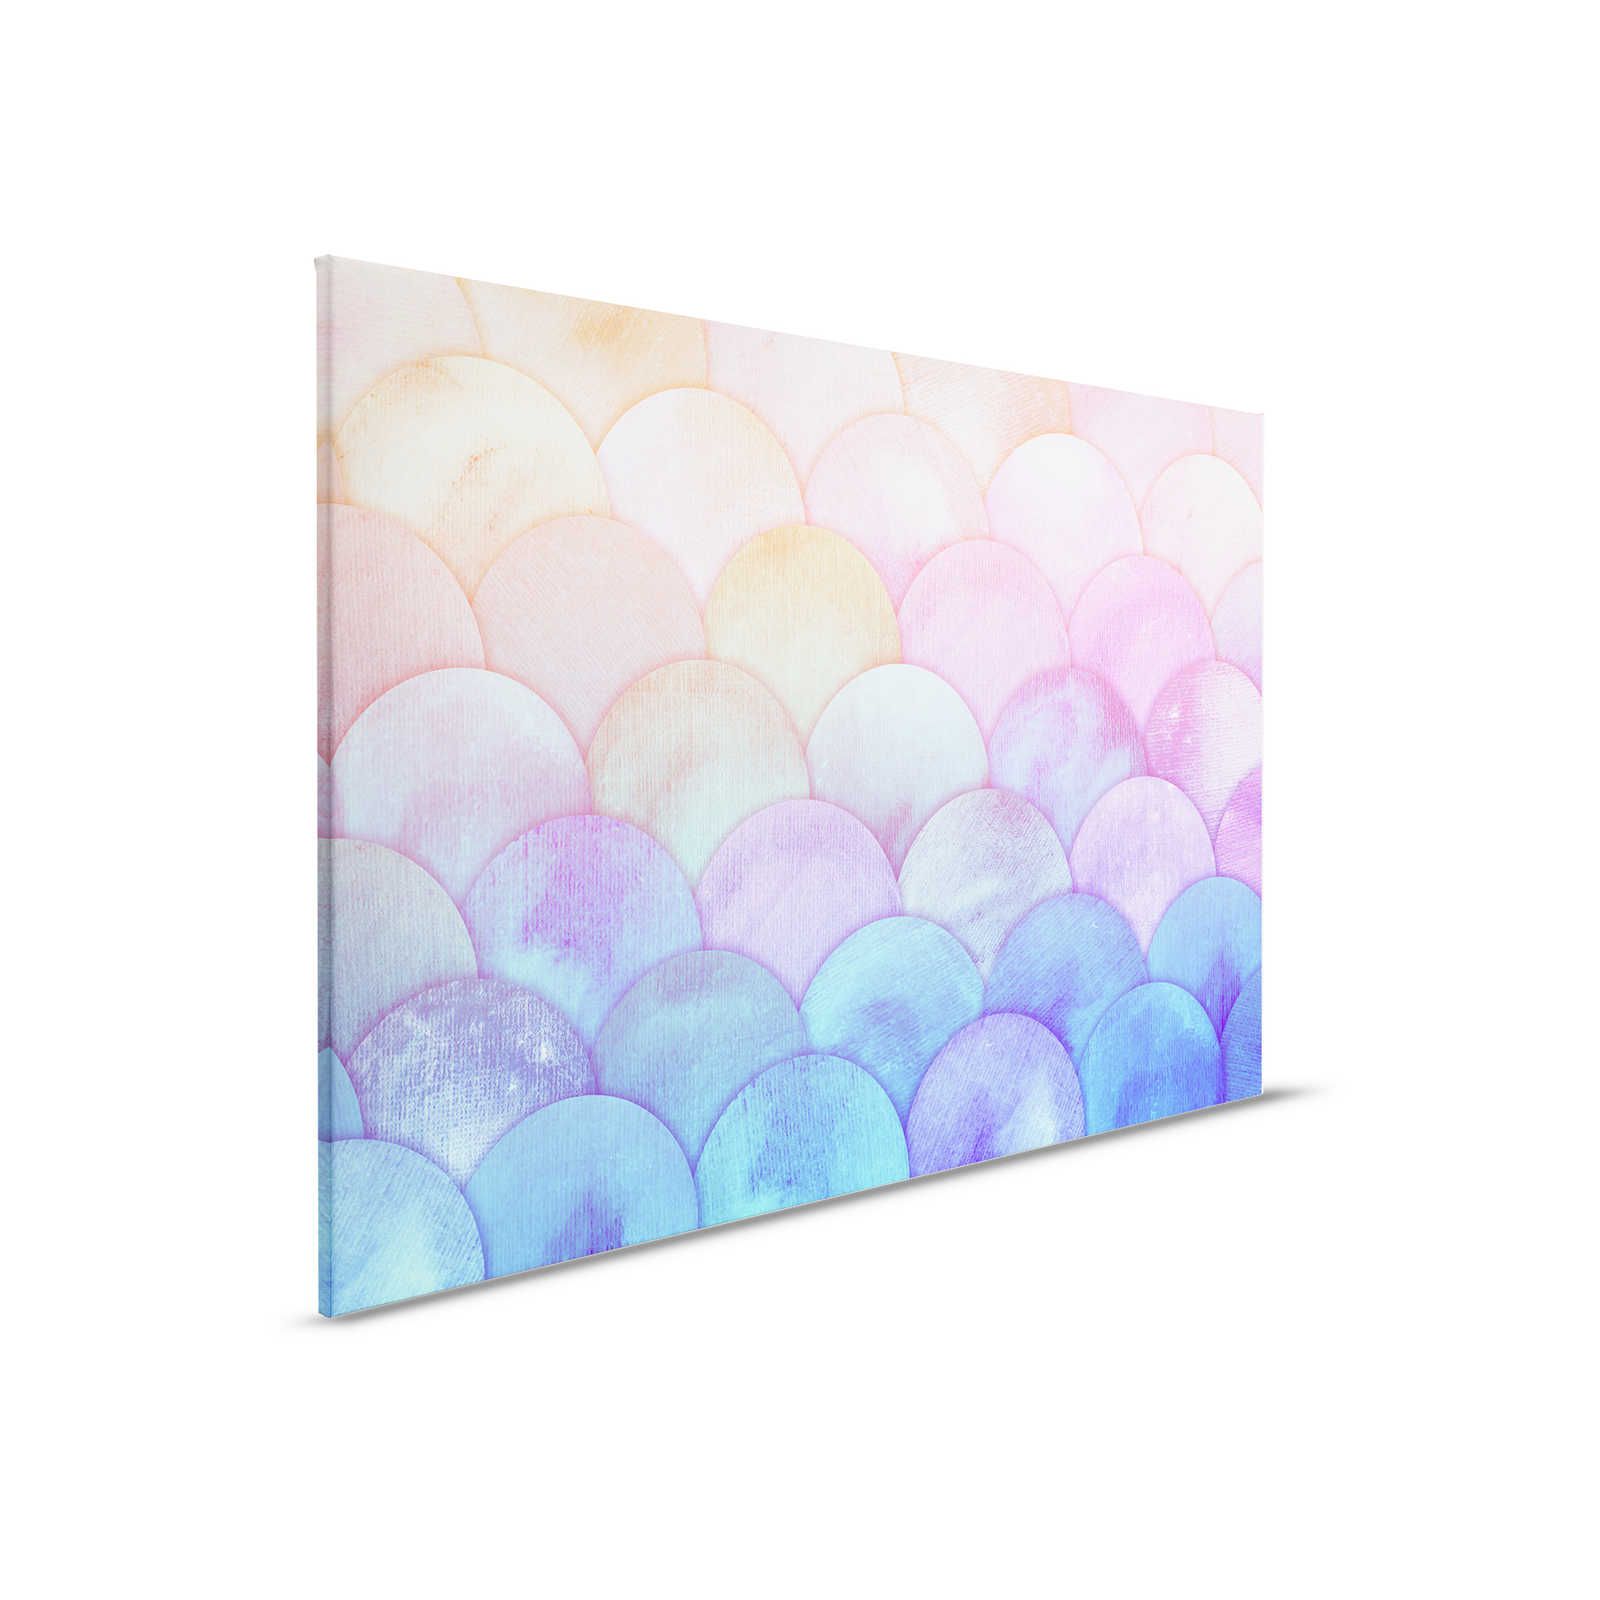         Canvas with fish scale pattern - 90 cm x 60 cm
    